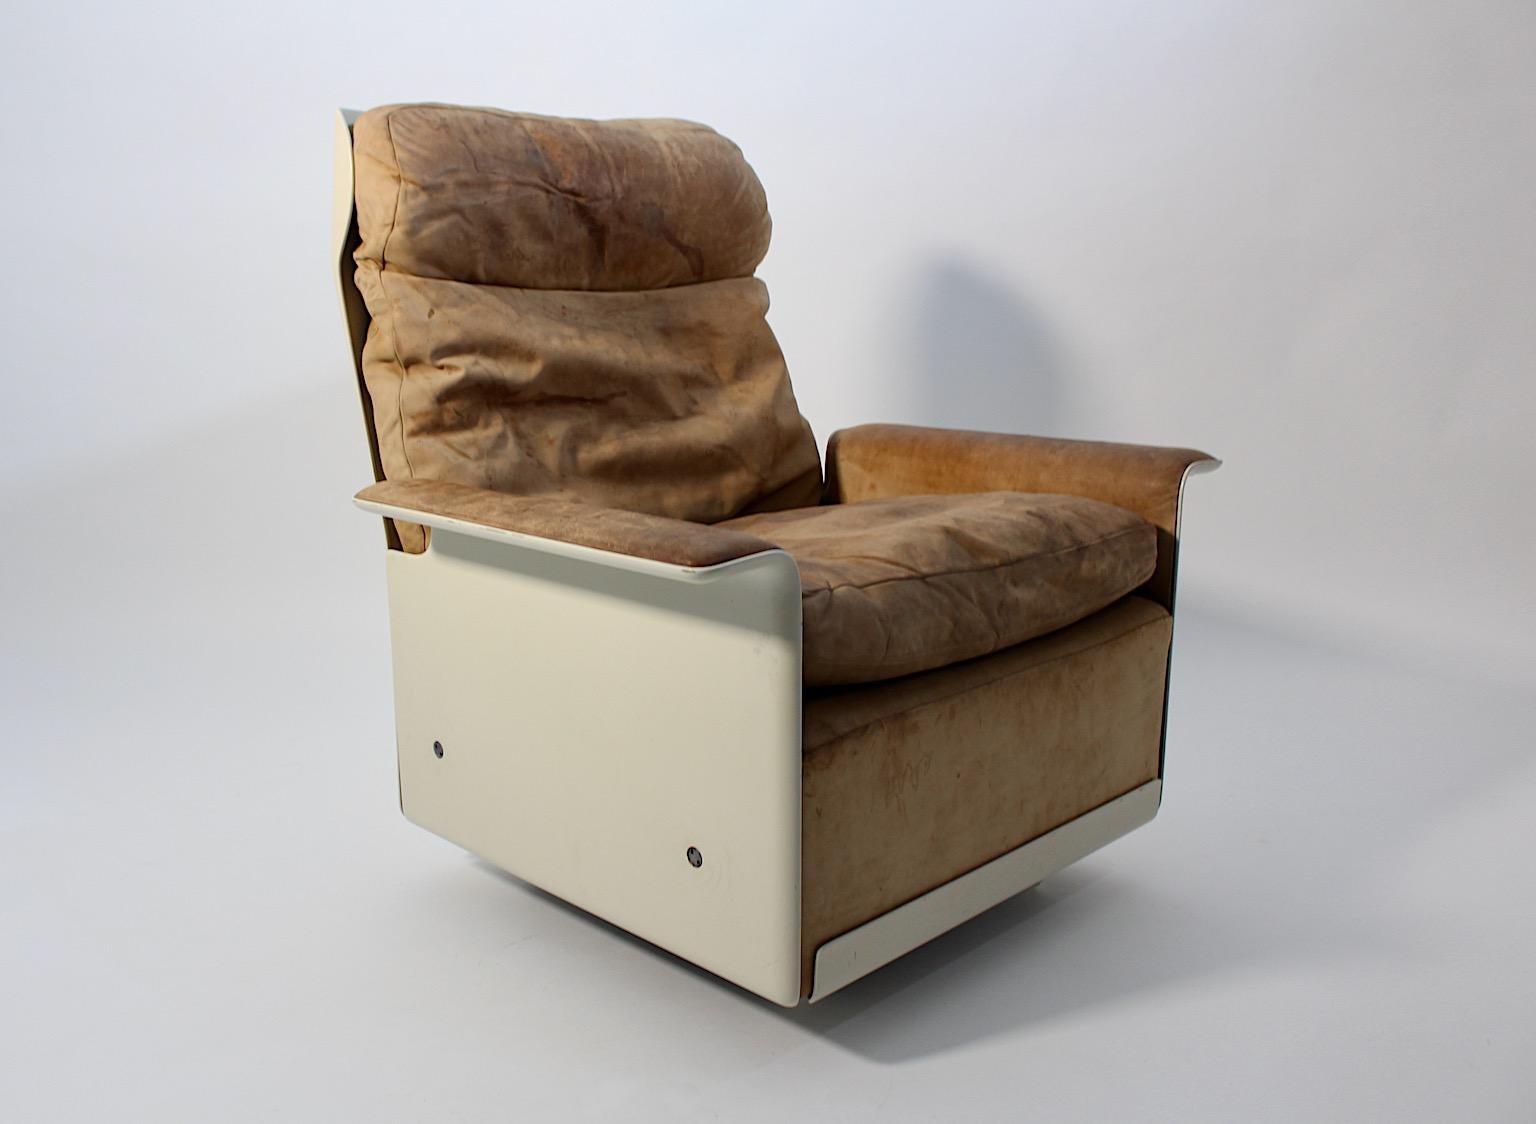 Space Age vintage authentic lounge chair from plastic and leather in brown and ivory color tone by Dieter Rams, 1960s Germany.
A fantastic and freestanding vintage lounge chair designed by the 
German industry designer Dieter Rams 1960s from ivory